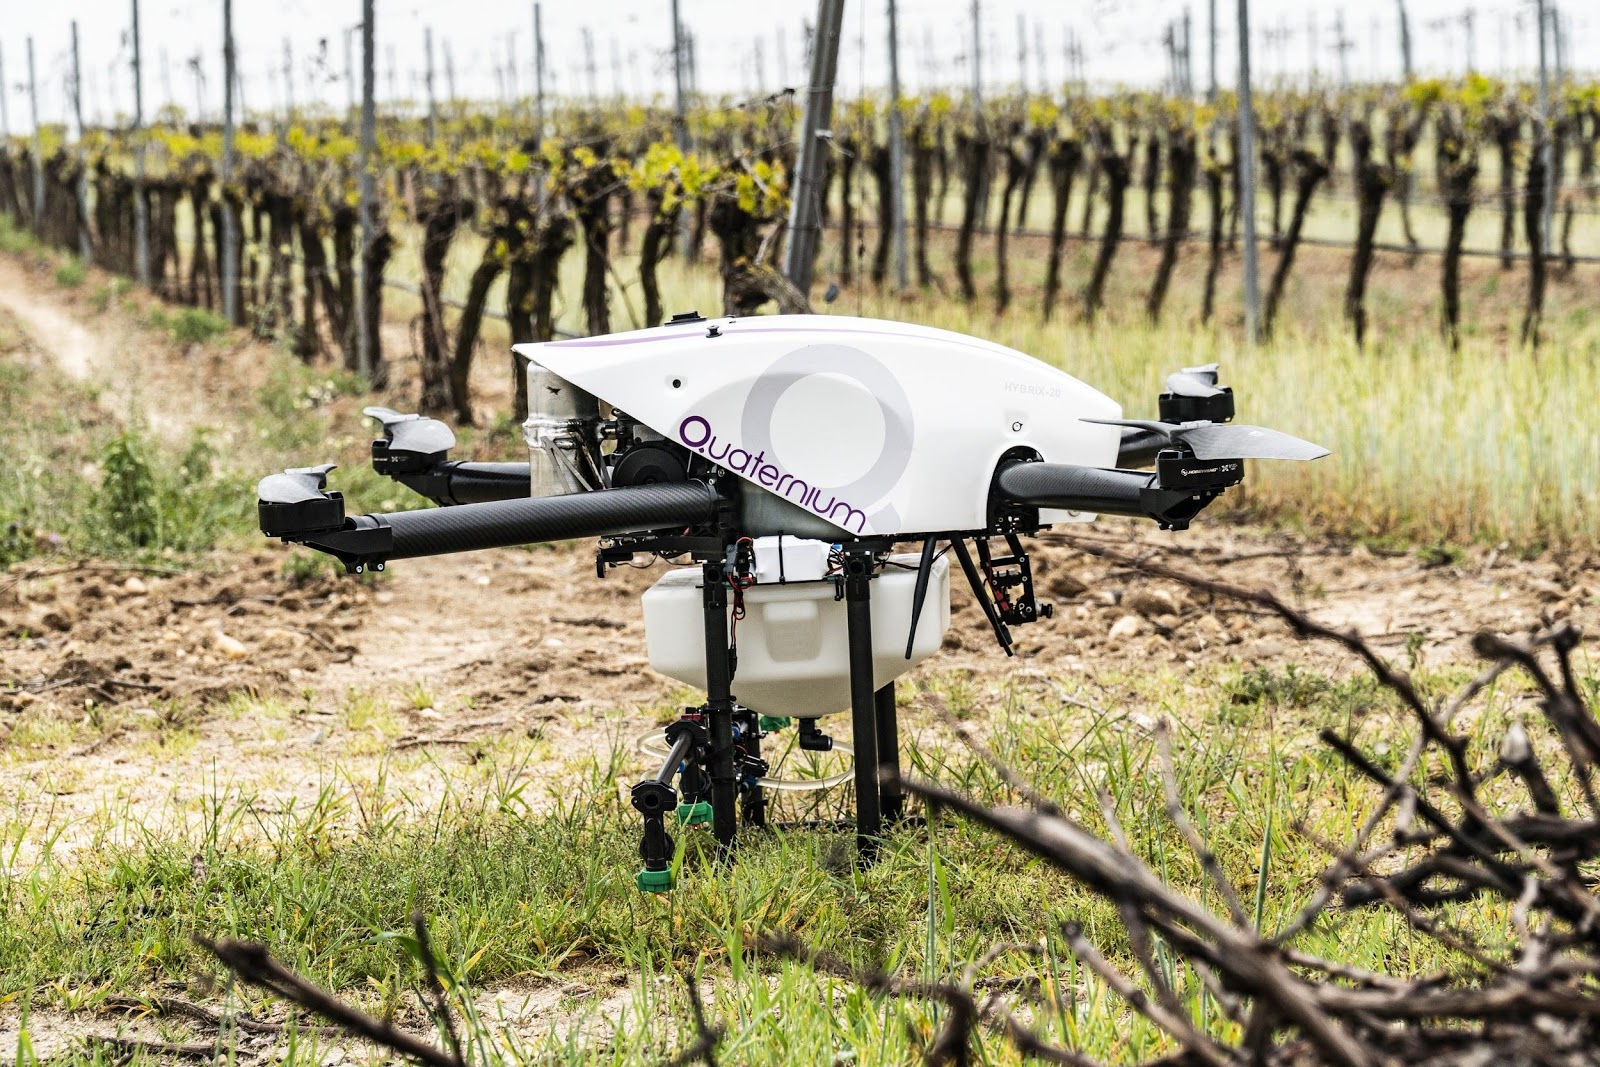 Hybrid drones open new opportunities for farmers